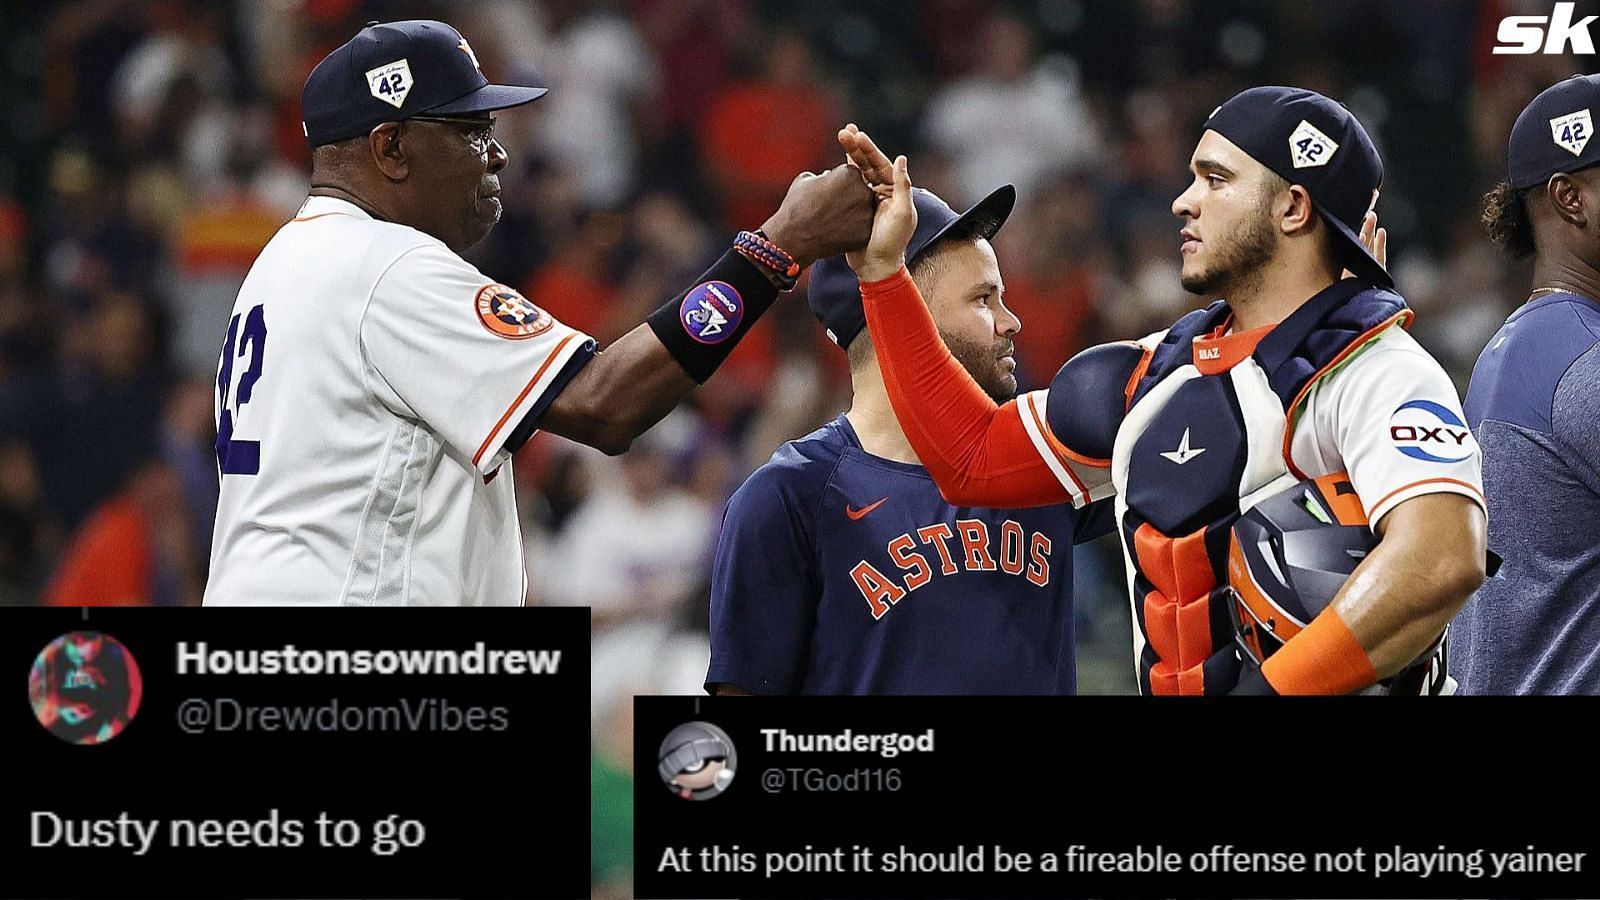 Houston Astros fans react to lack of contact between team and